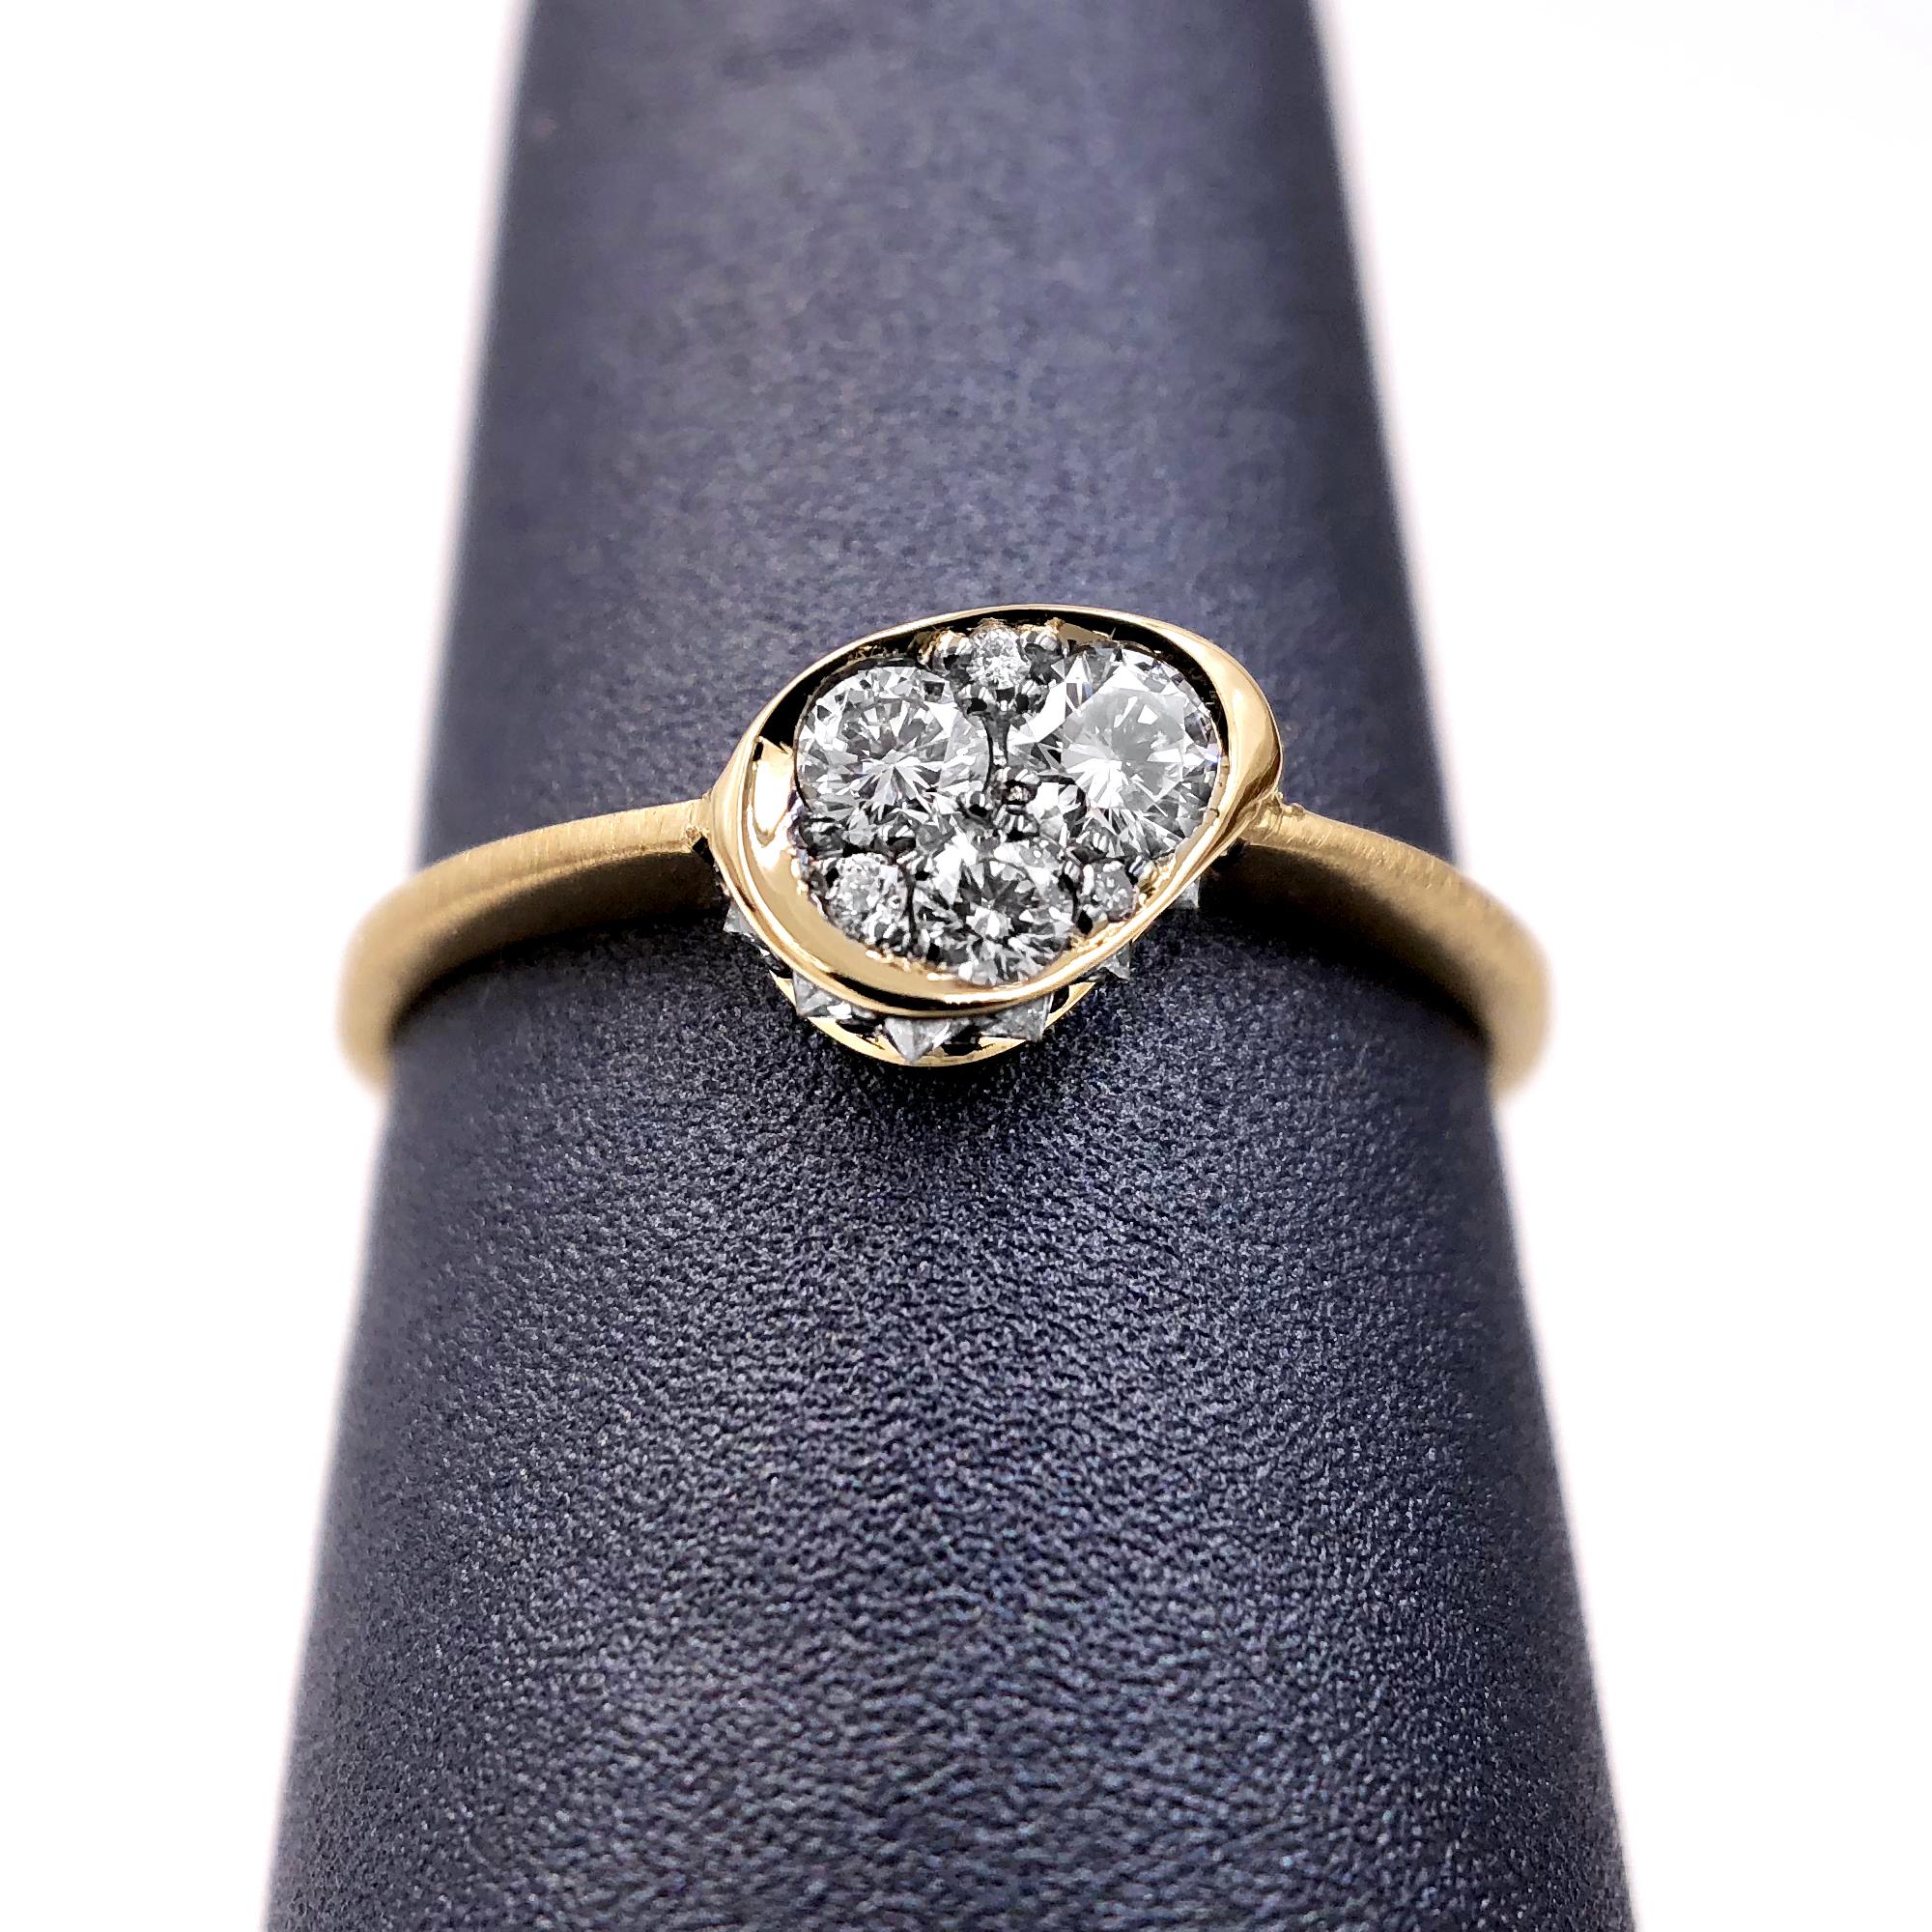 Innervisions Ring handmade in Belgium by jewelry designer Joke Quick in matte-finished 18k yellow gold featuring superior-quality DE/vvs round brilliant-cut white diamonds in the center with inverted white diamonds along the sides totaling 0.25